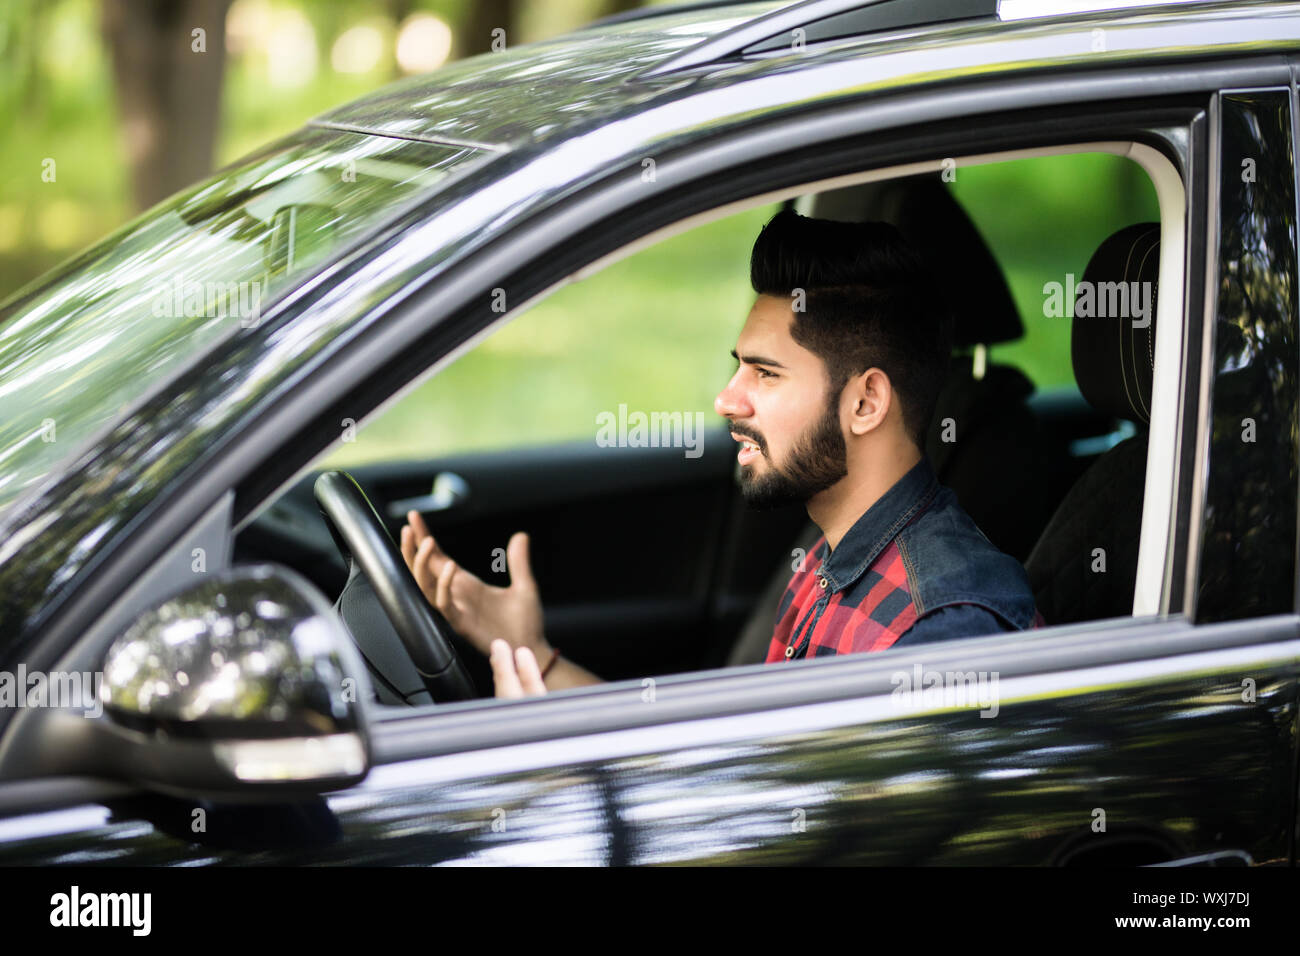 Young man driving a car and looks angry and screaming Stock Photo